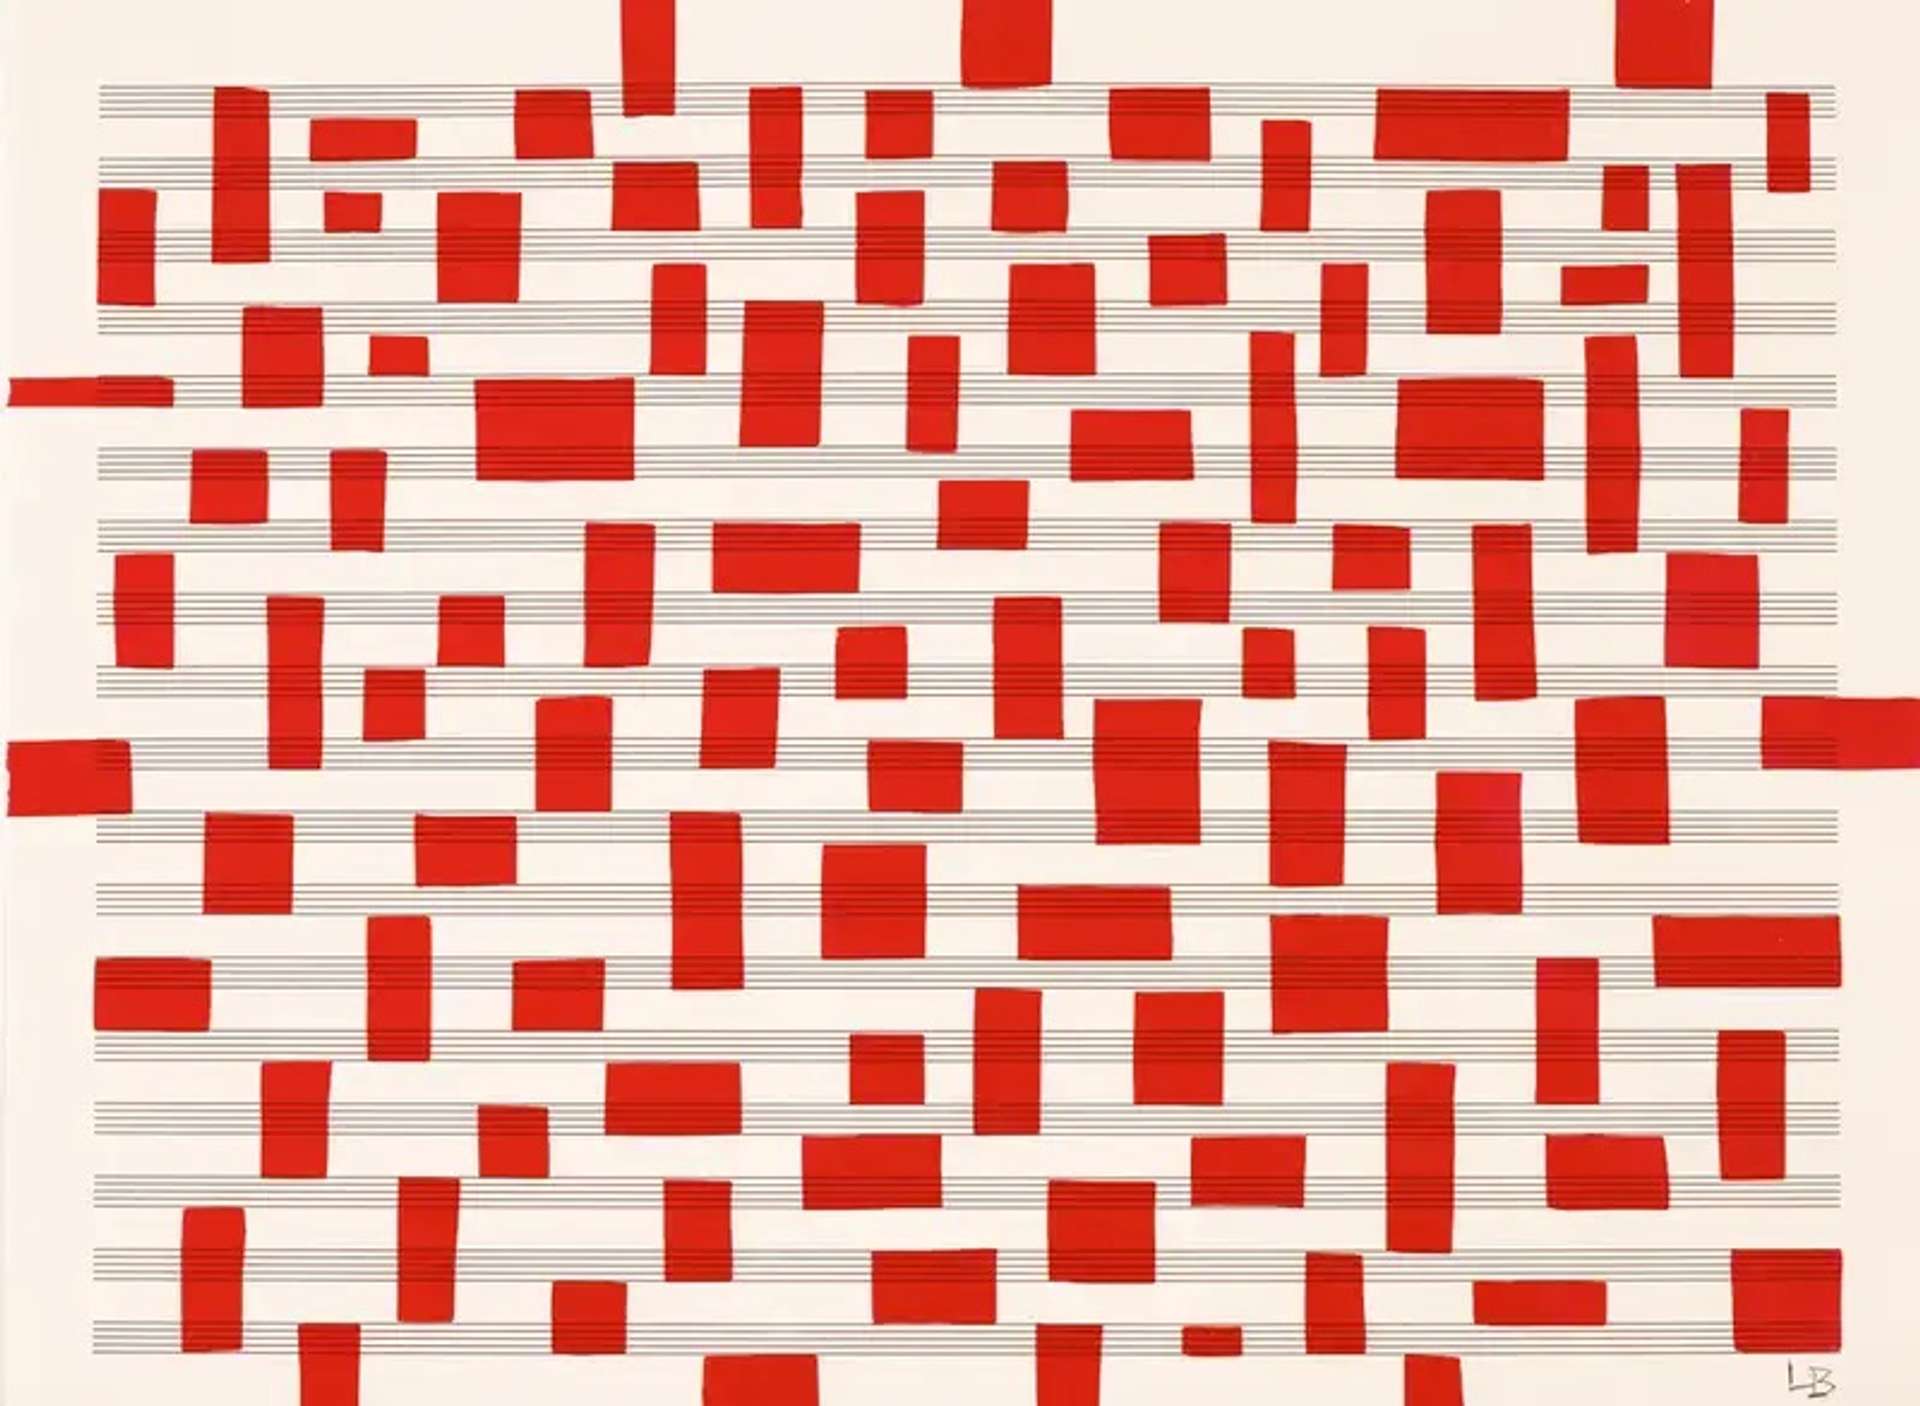 Louise Bourgeois’ Untitled #15. A screenprint of red rectangles in a pattern against a sheet of horizontal lines.